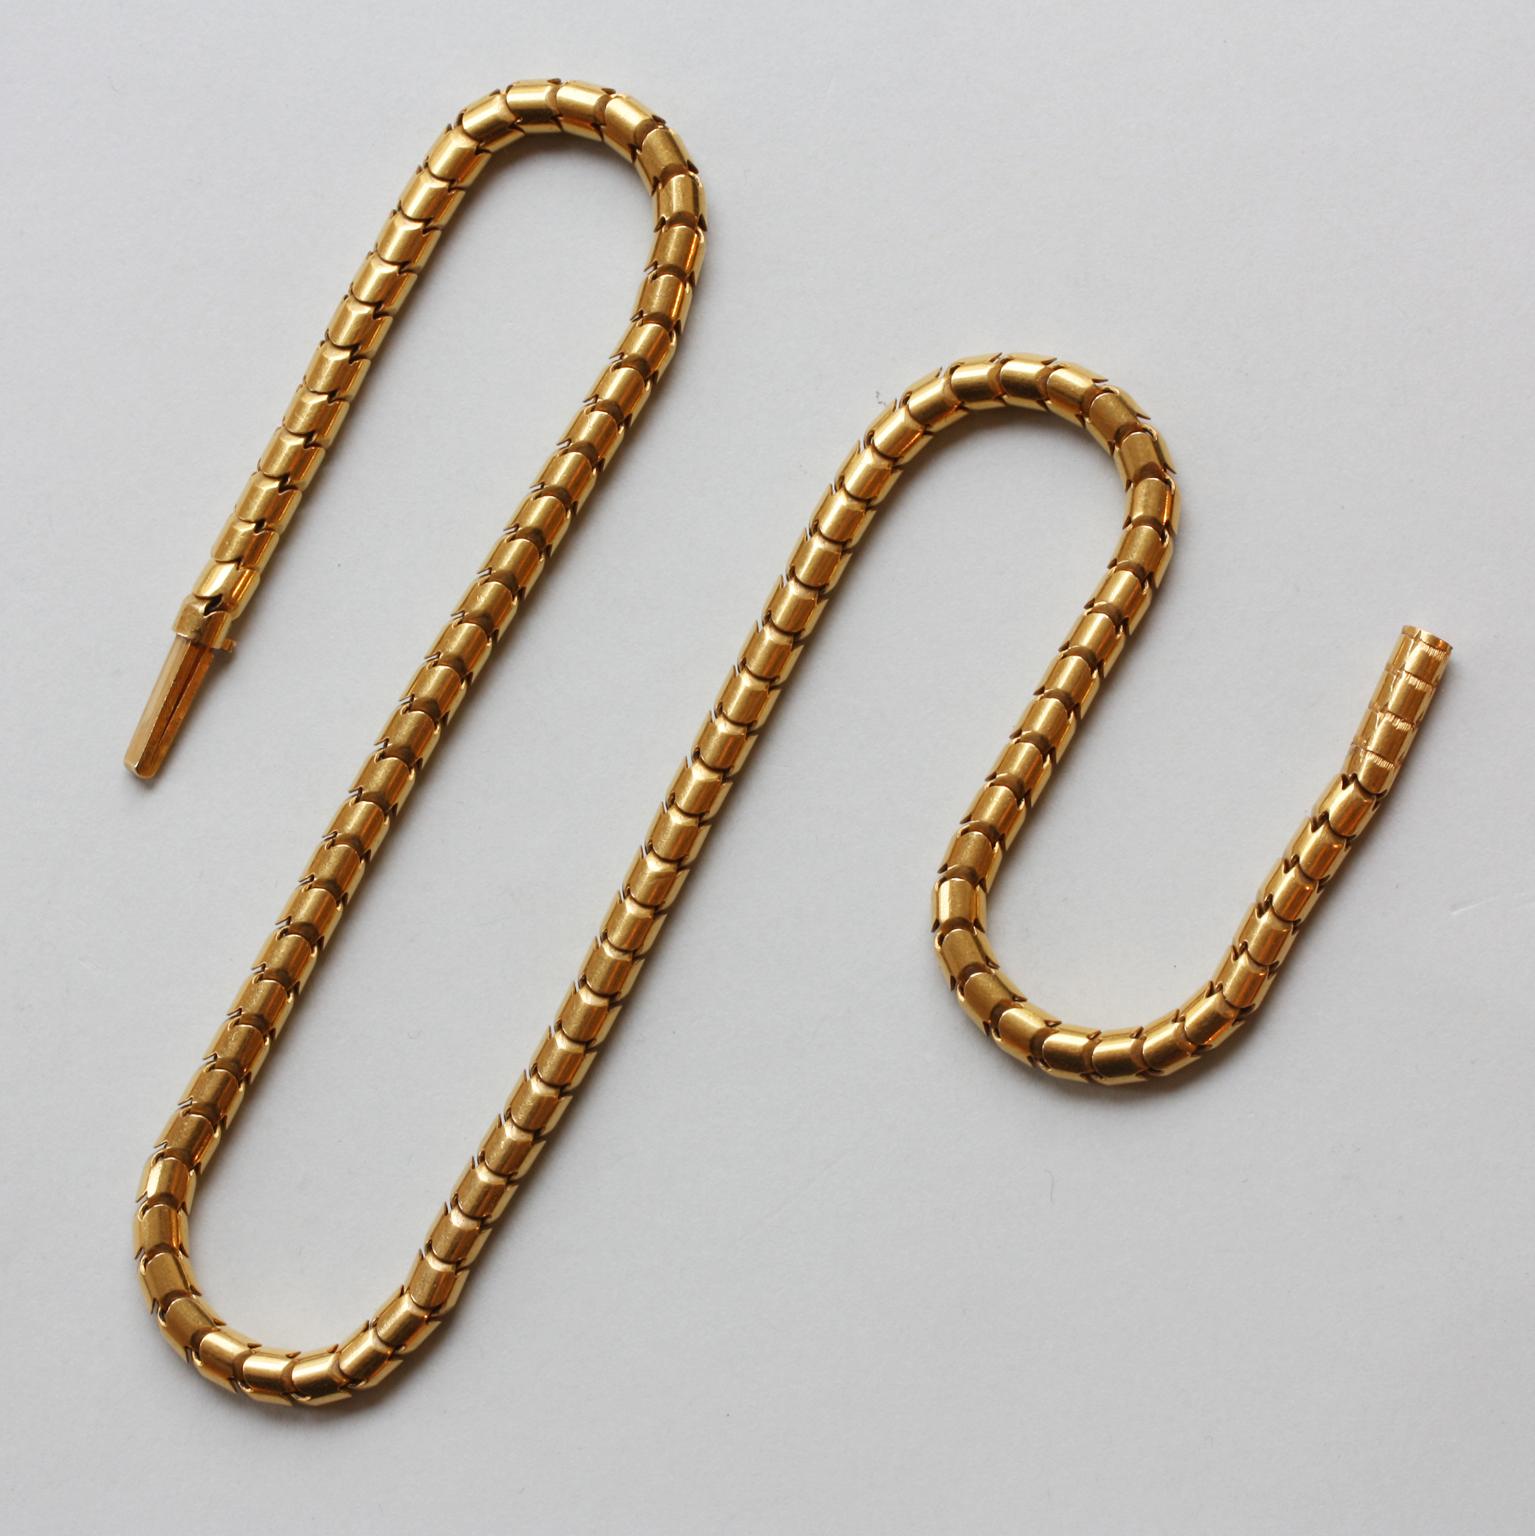 An 18 carat gold flexible snake chain with round cylindrical smooth links and an invisible lock, England, 19th century.

length: 39.5 cm
weight: 33.87 grams
width: 5 mm